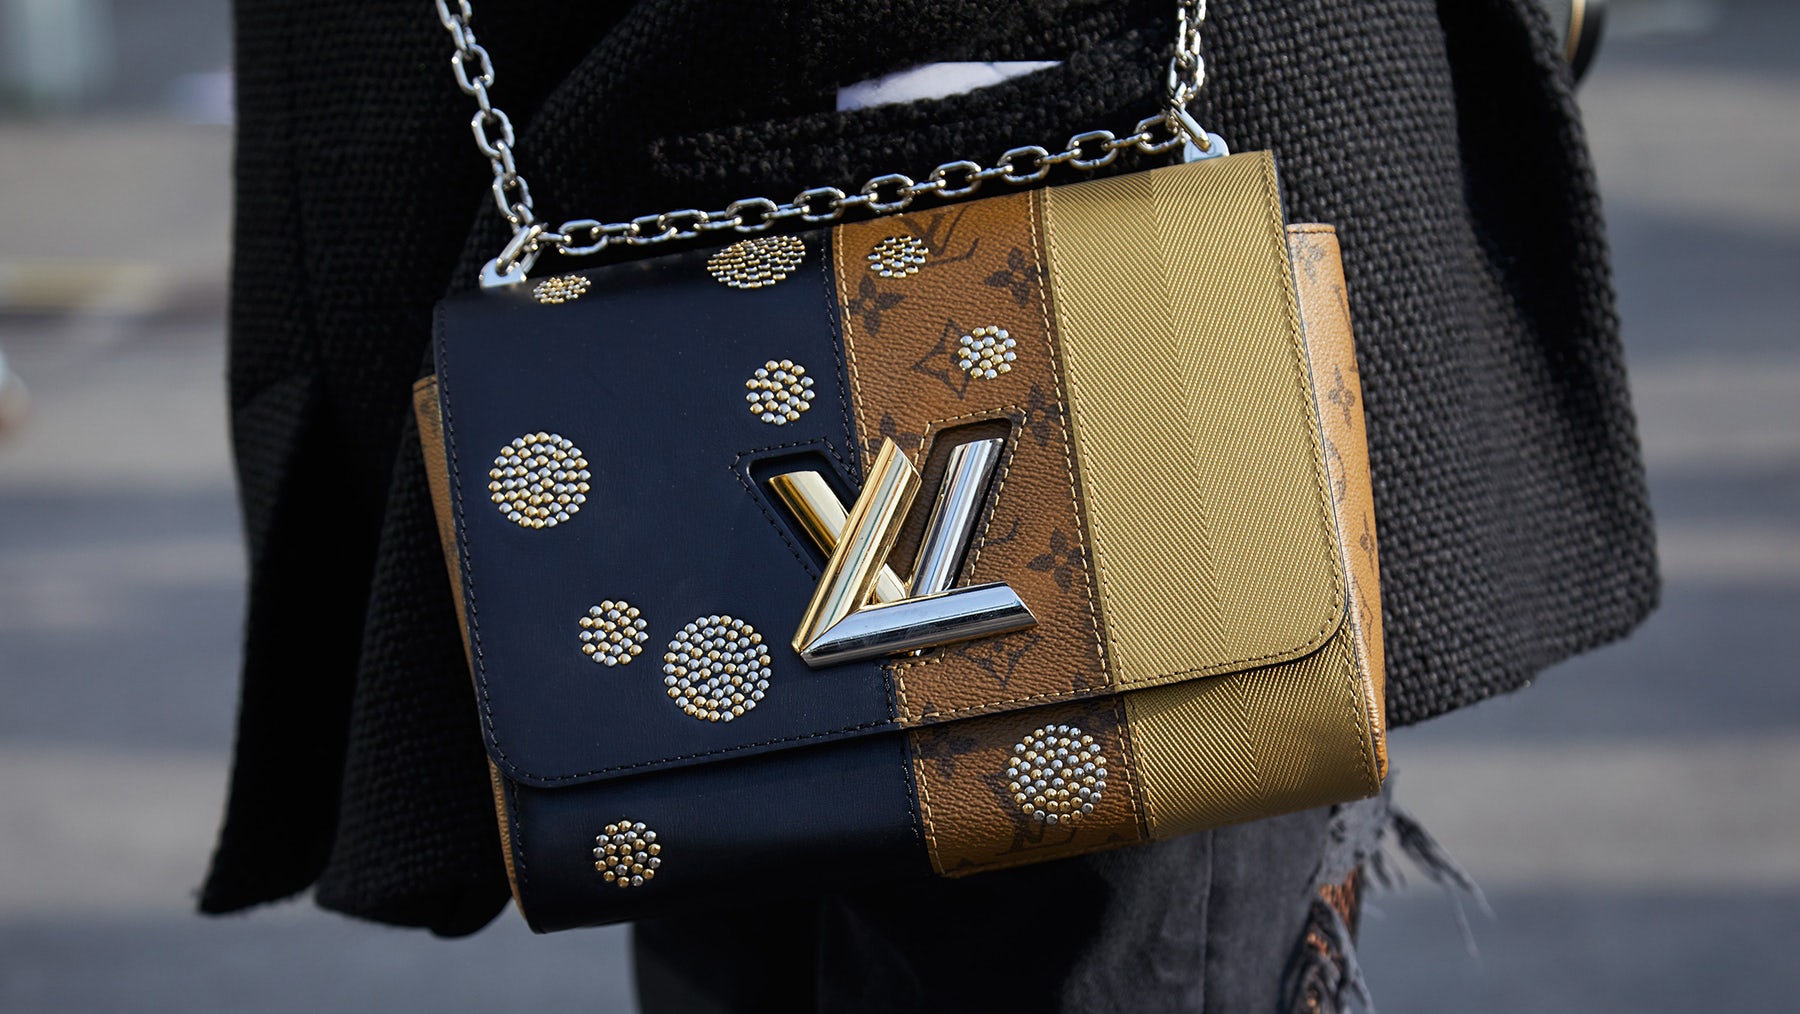 Fashion Accessories sales are on the rise - Louis Vuitton